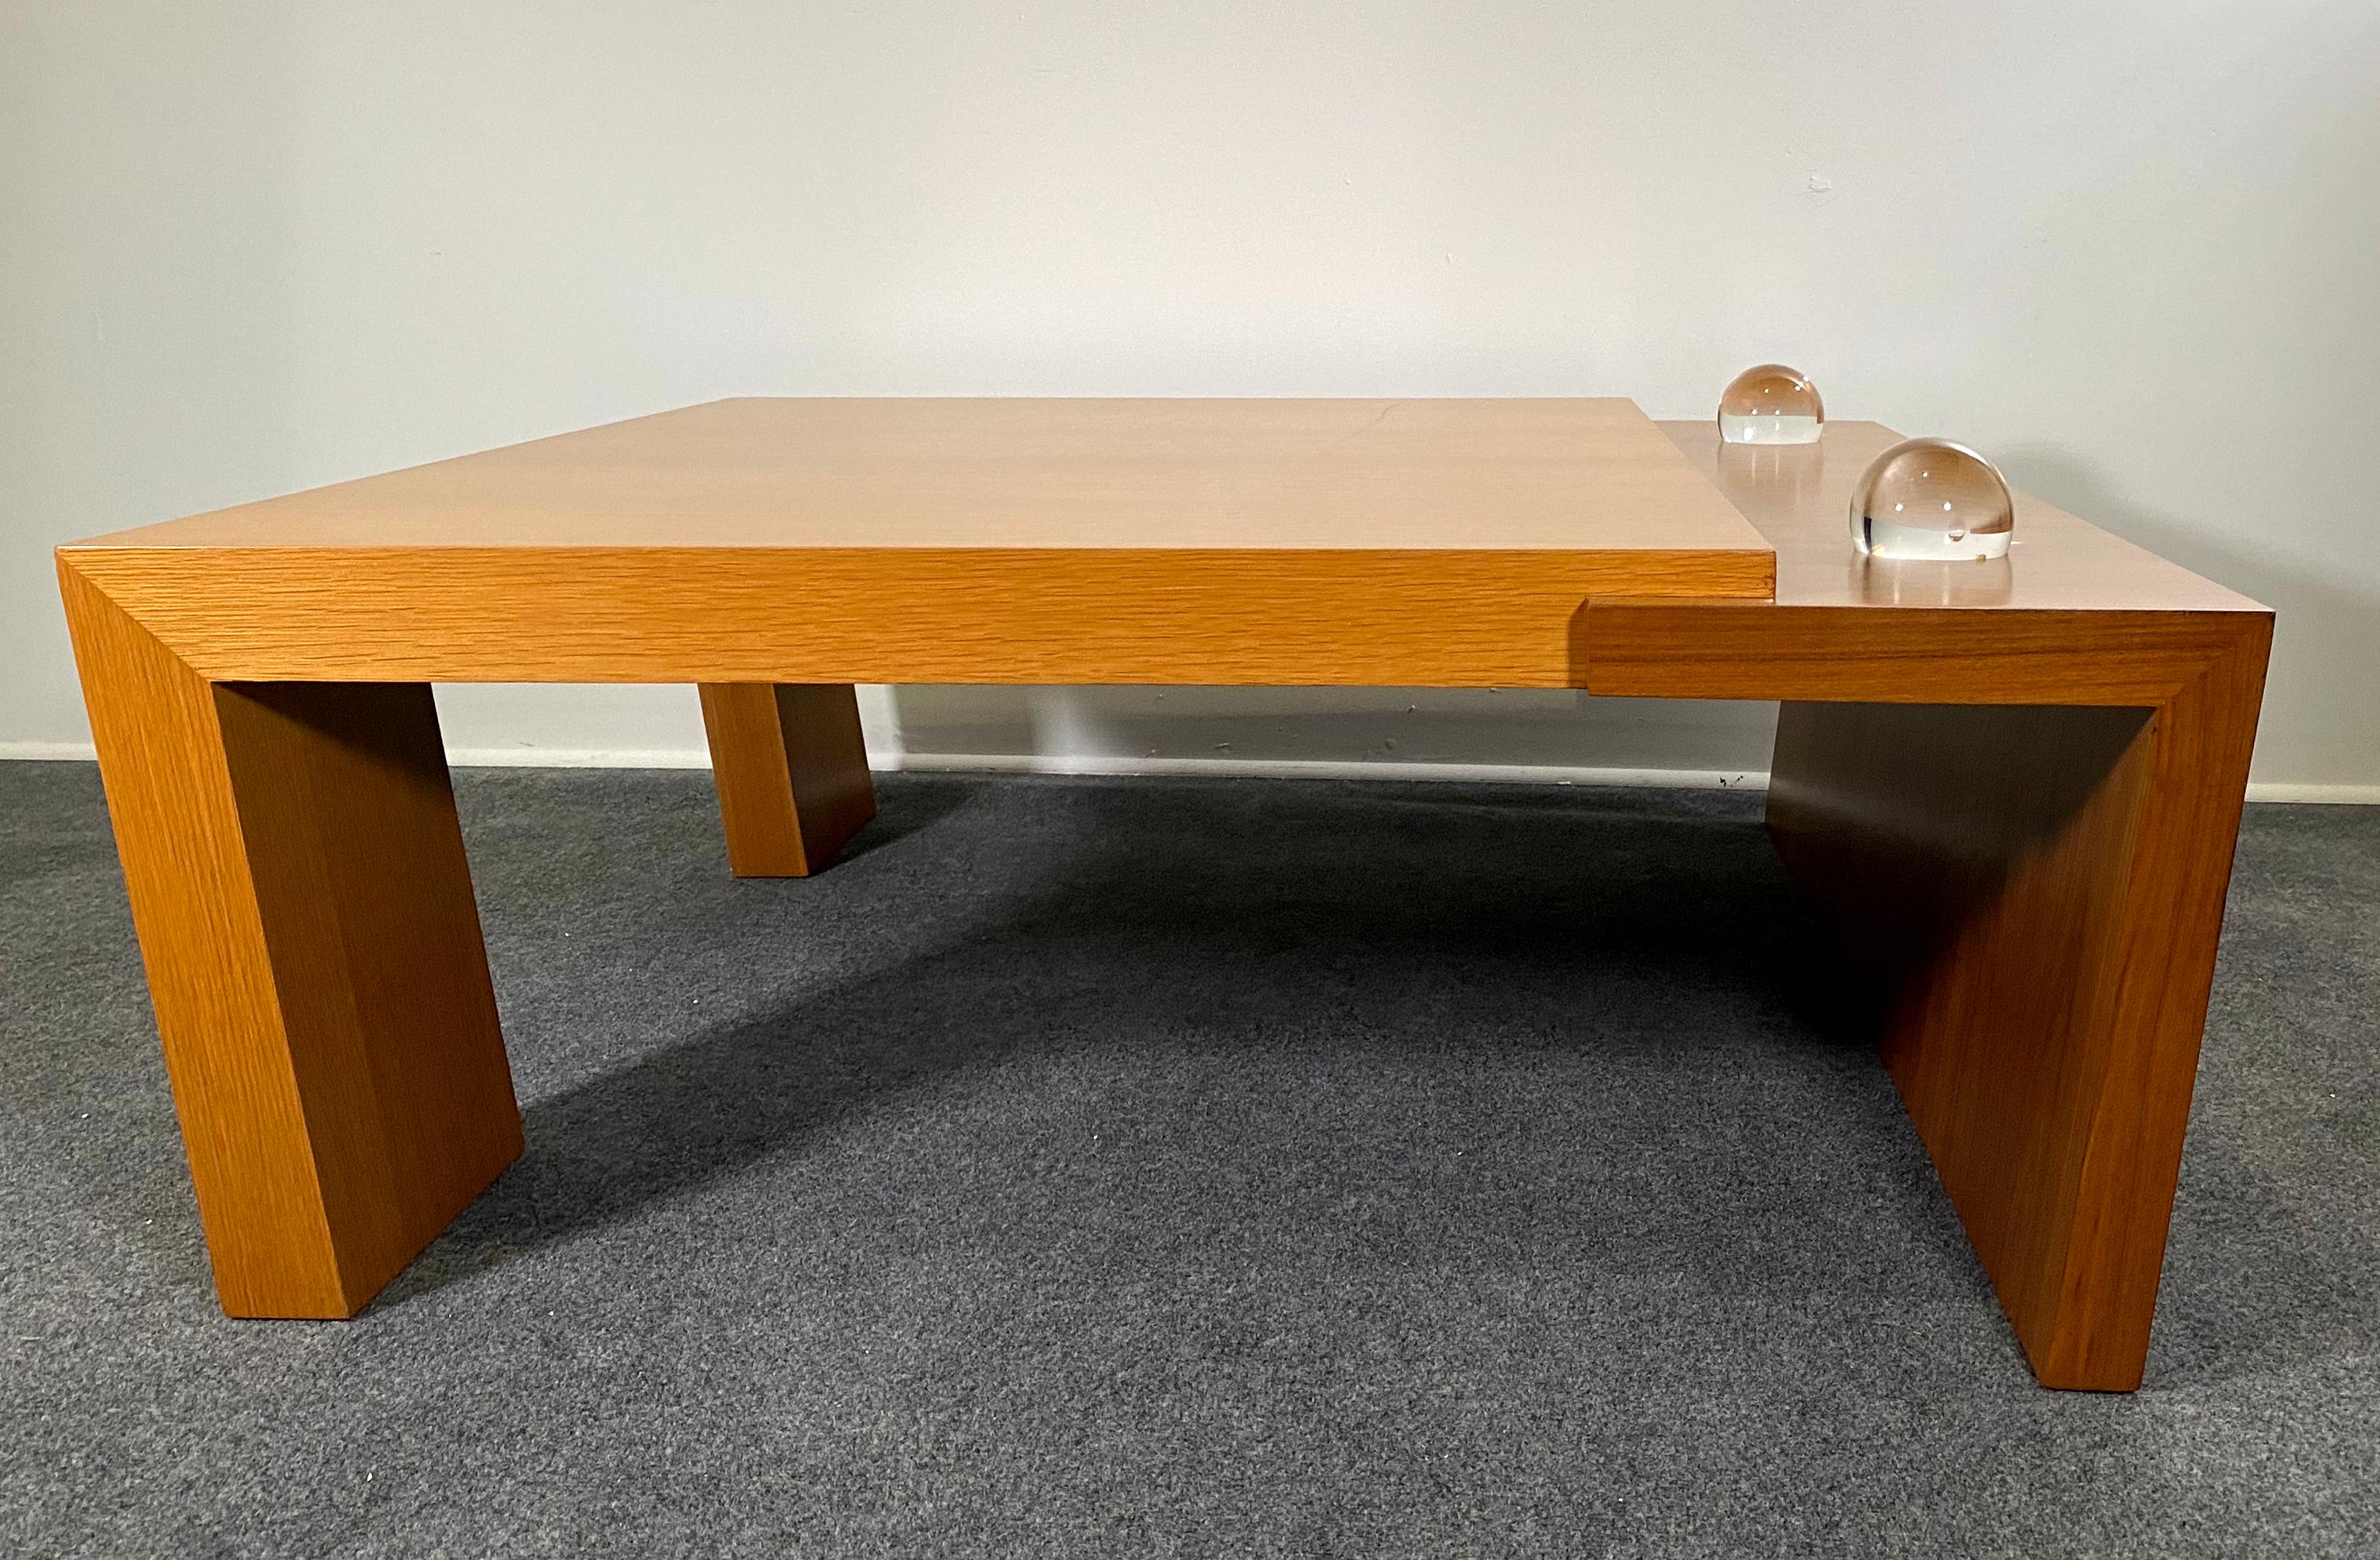 Colombian artist designed bespoke furniture, contemporary walnut and bleached mahogany coffee table with glass spheres.